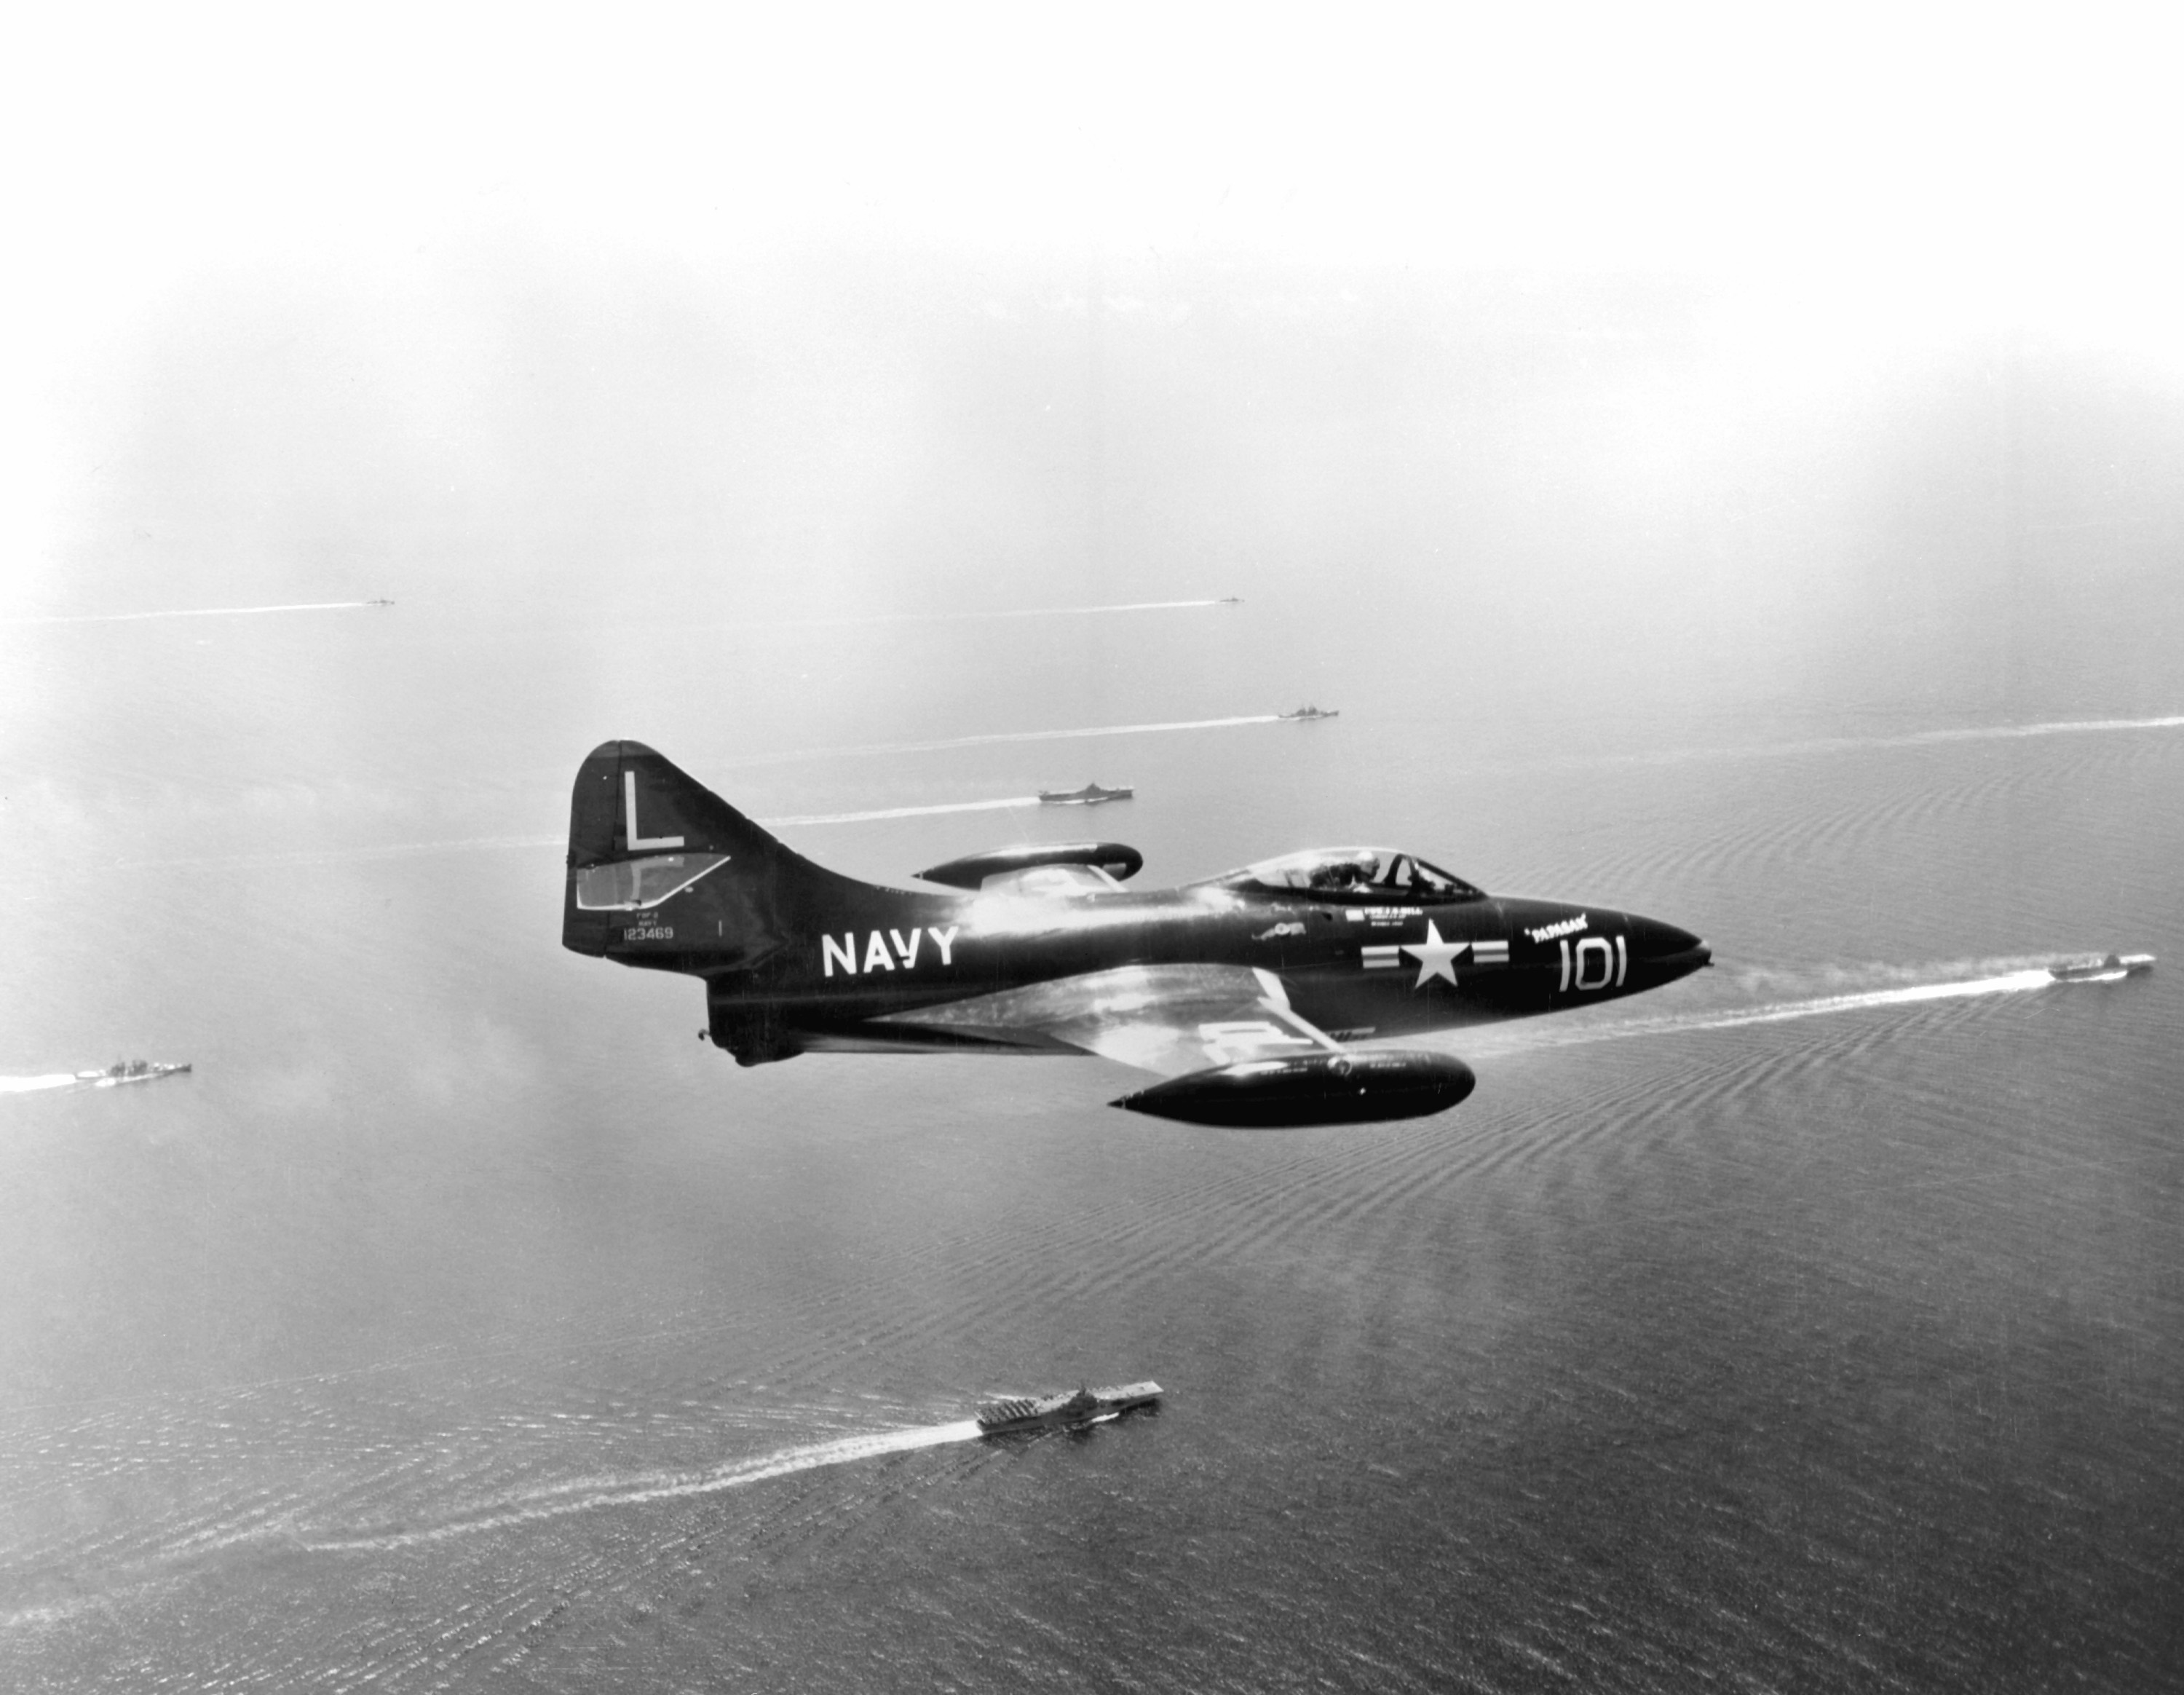 F9F-2 Panther fighter flying over carriers USS Bon Homme Richard, USS Essex, and USS Princeton off Korea, 1 Aug 1952